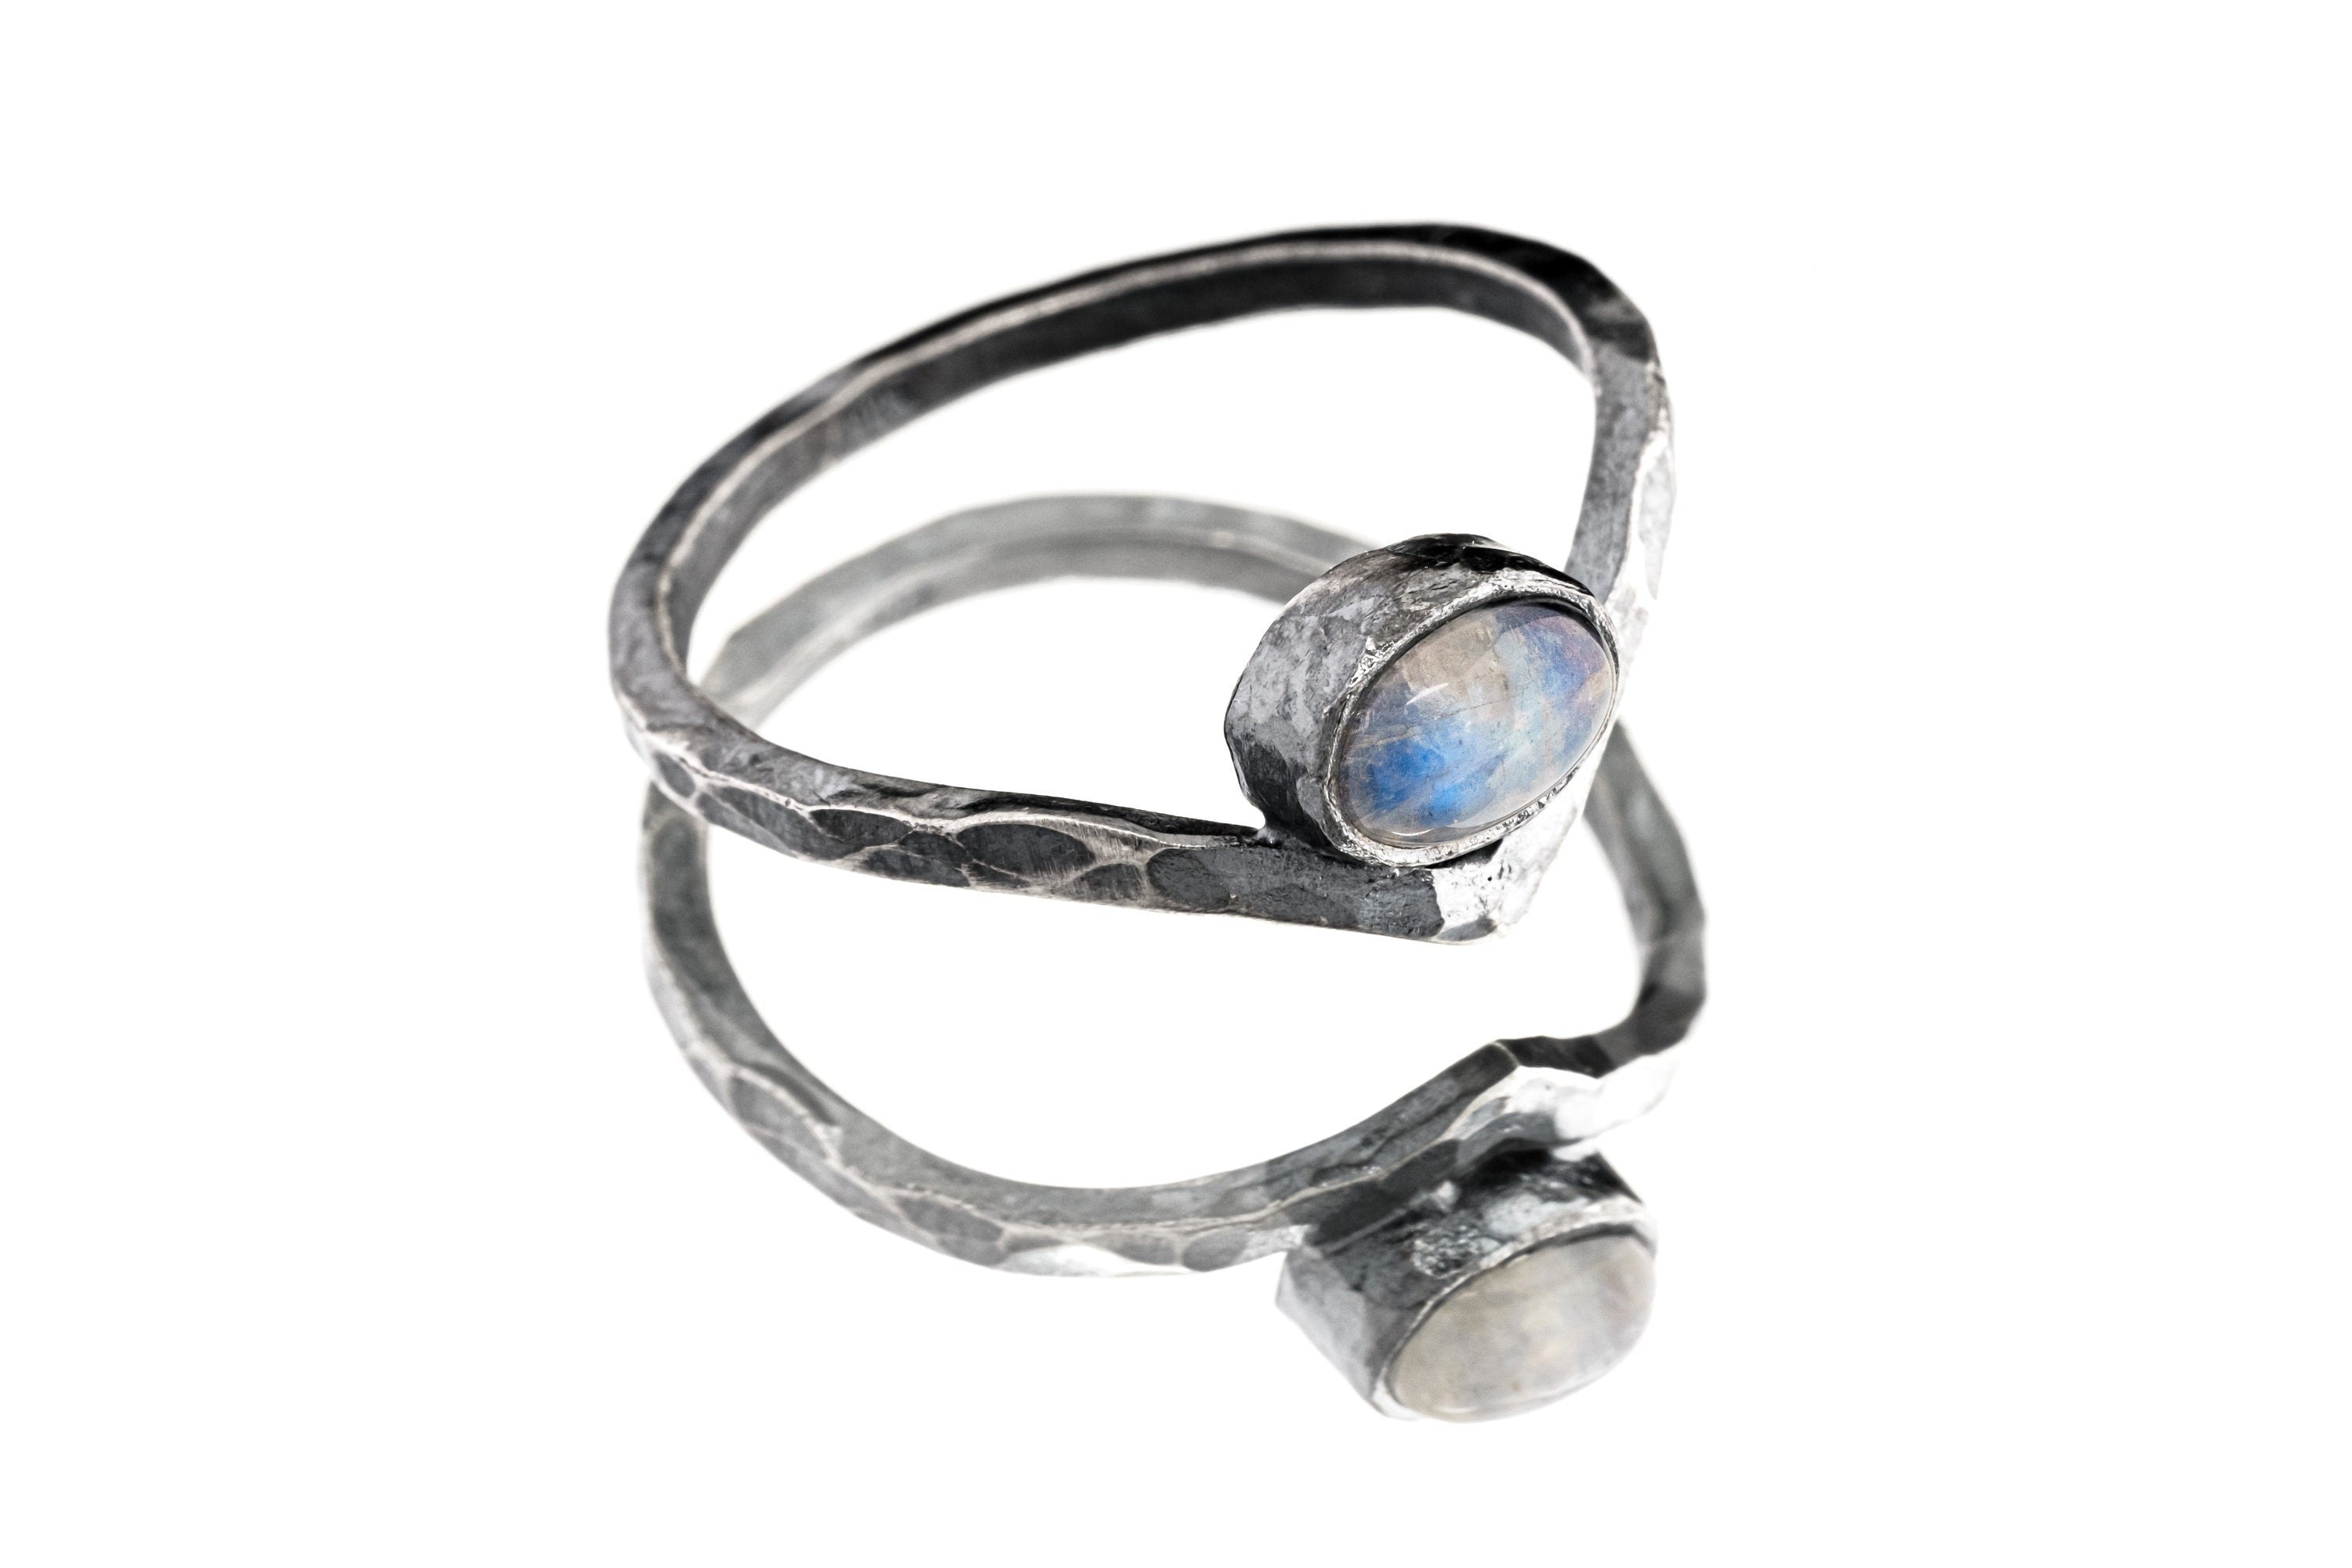 Blue Oval Moonstone Ring - Rustic Boho Stack Ring - Hammered Oxidised Triangle Band - 925 Sterling Silver - Size 4.5 - 8 US